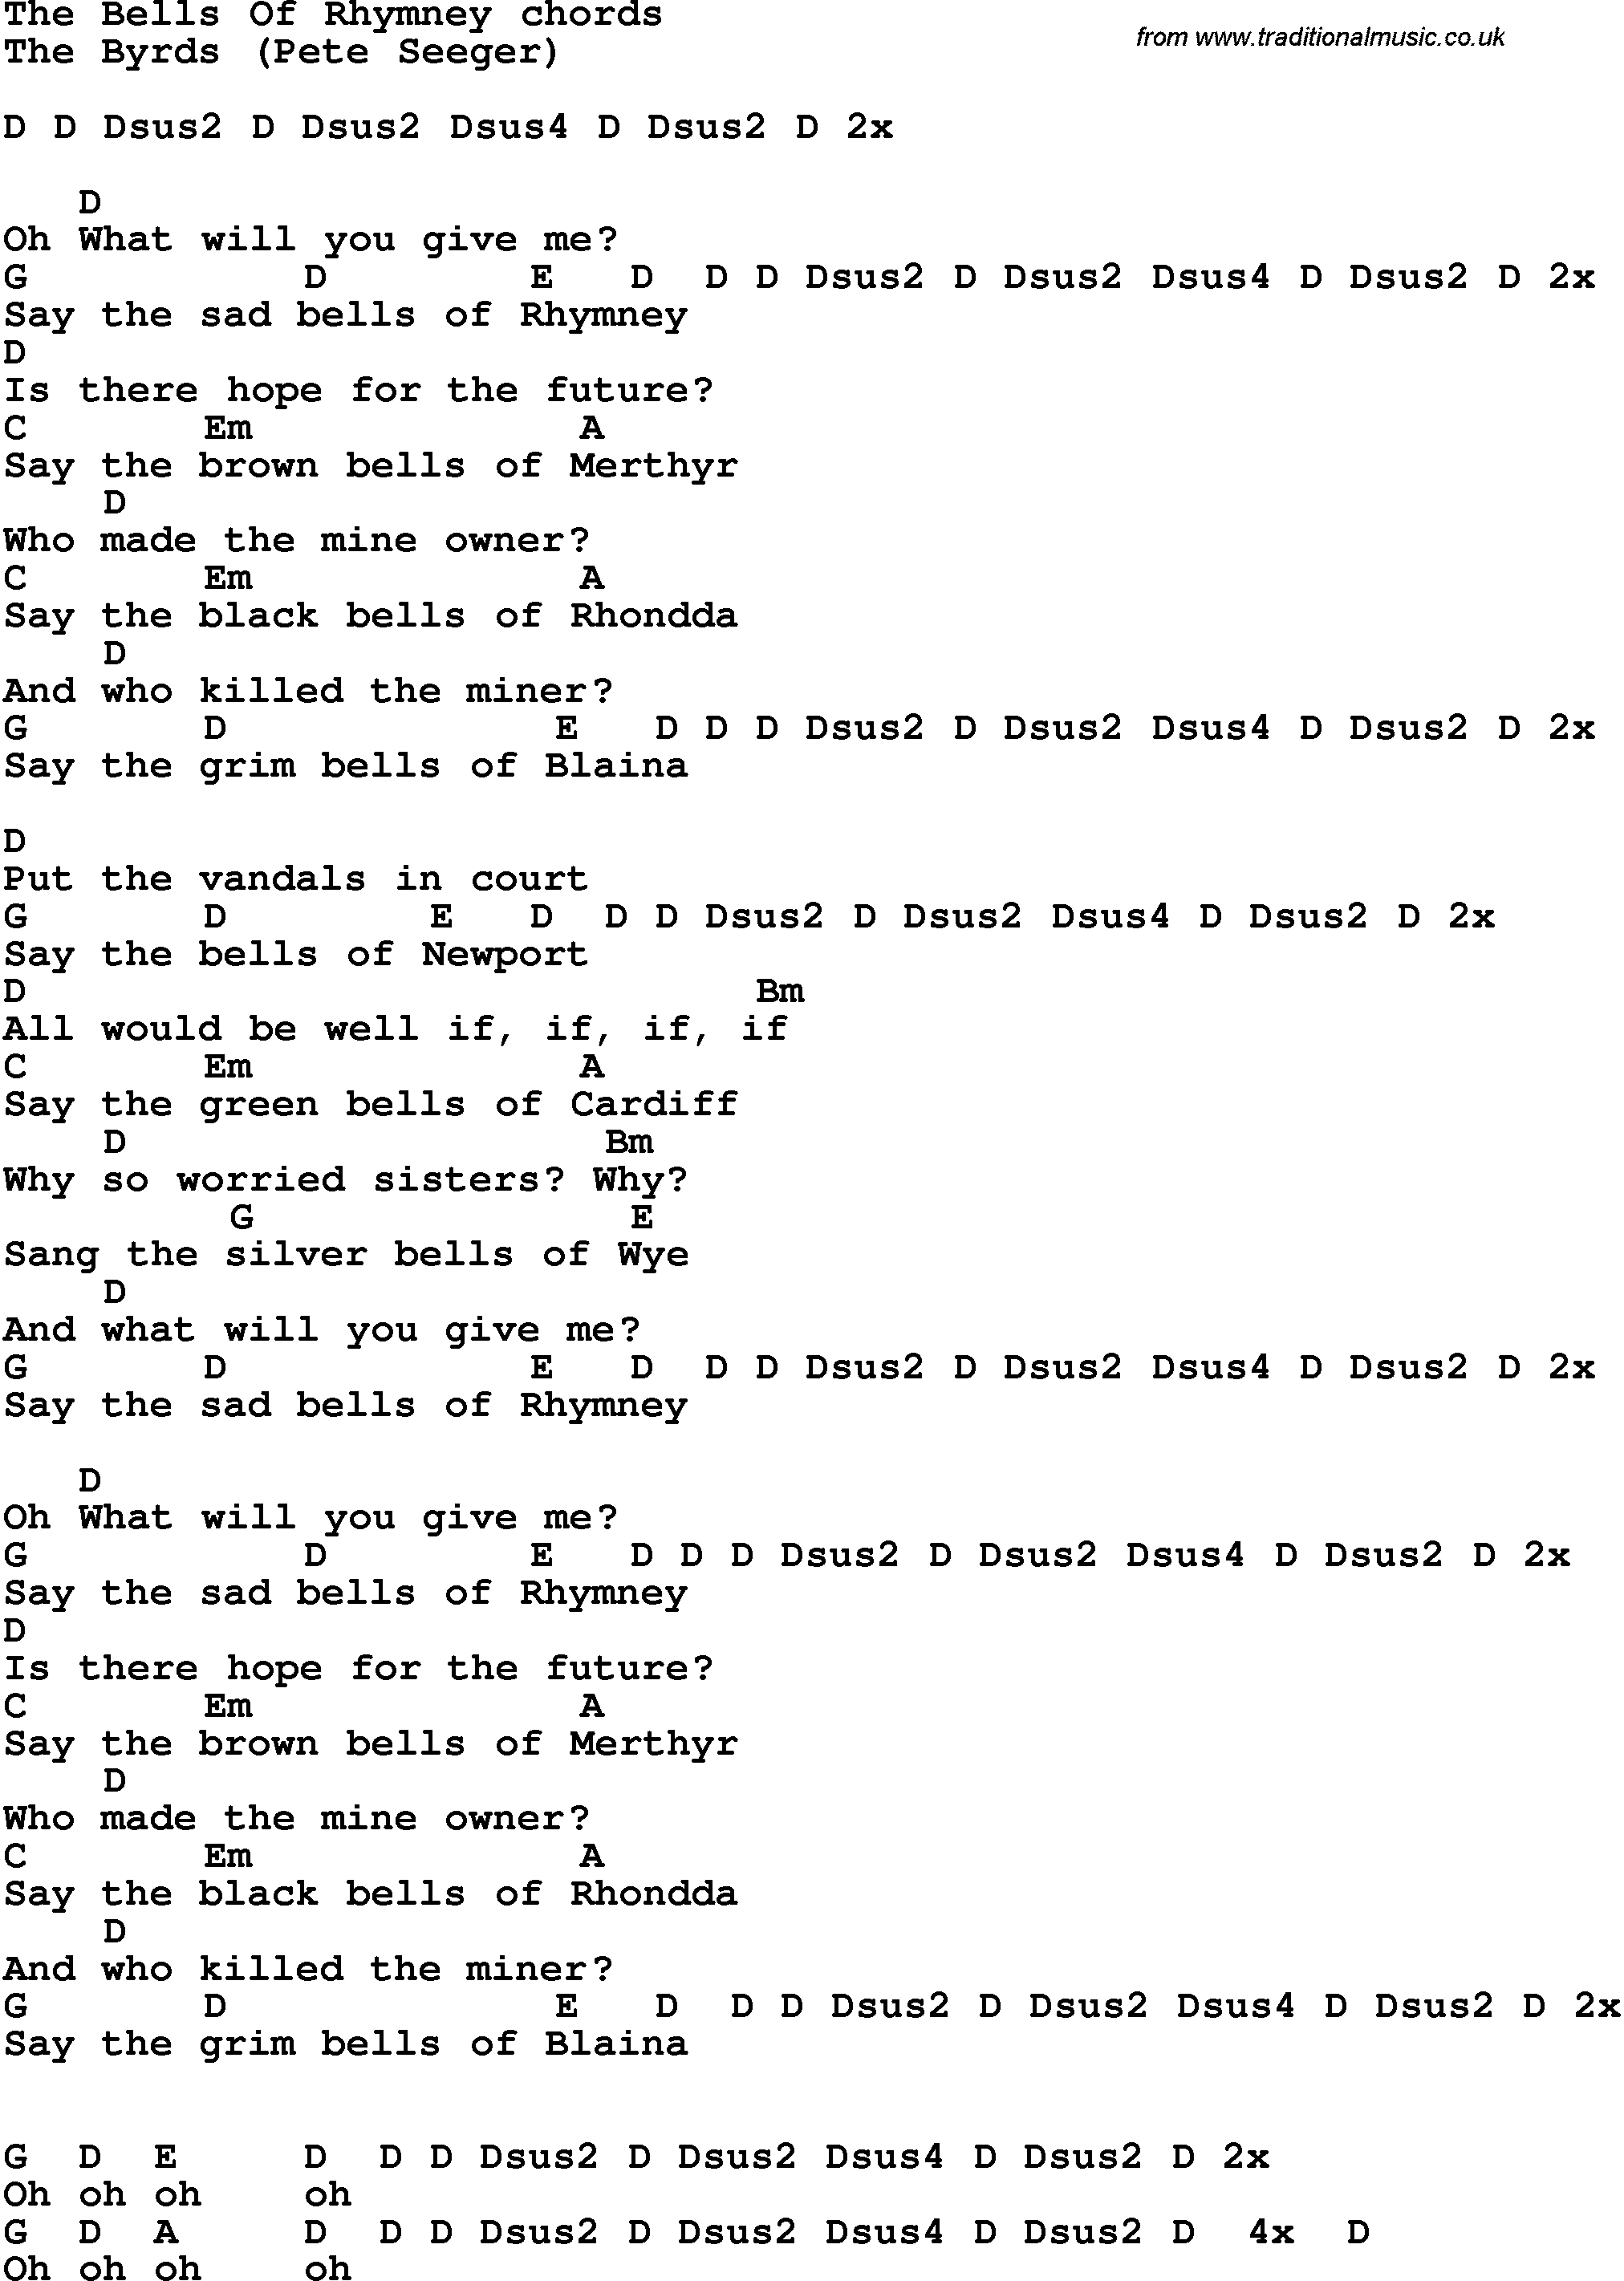 Song Lyrics with guitar chords for The Bells Of Rhymney